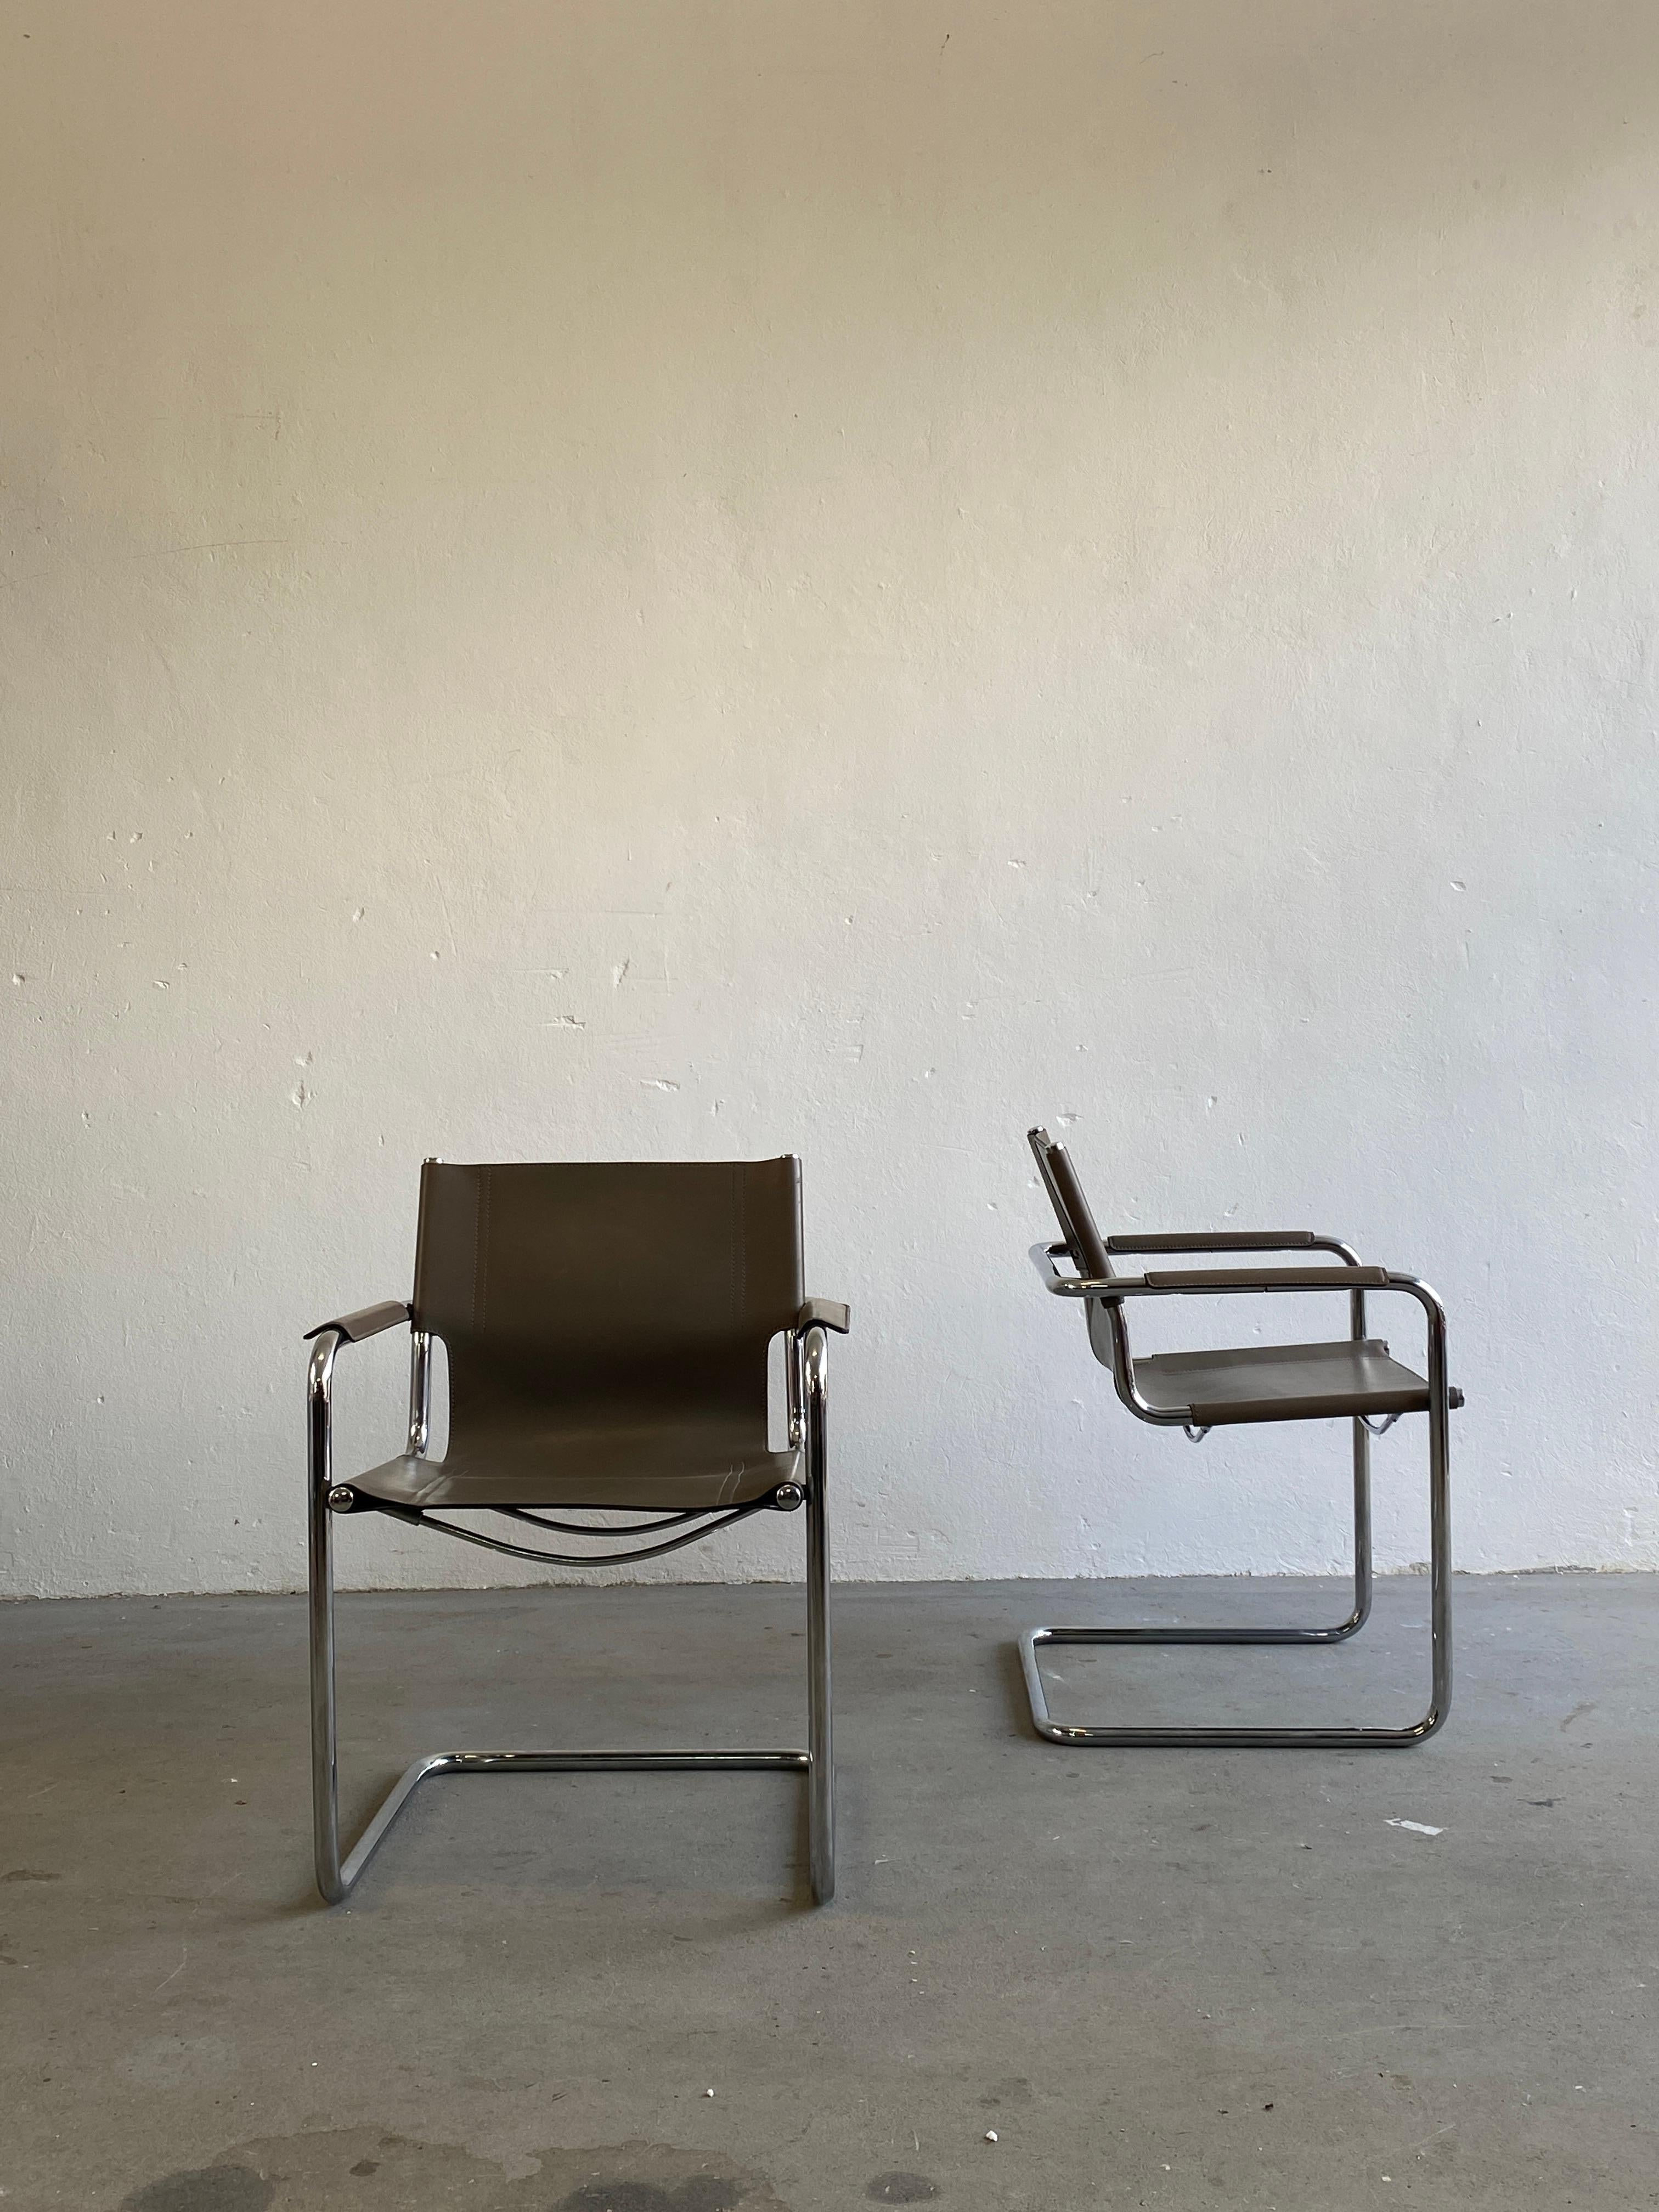 Steel Vintage Leather Cantilever Chairs, Centro Studi for Matteo Grassi, 1980s Italy